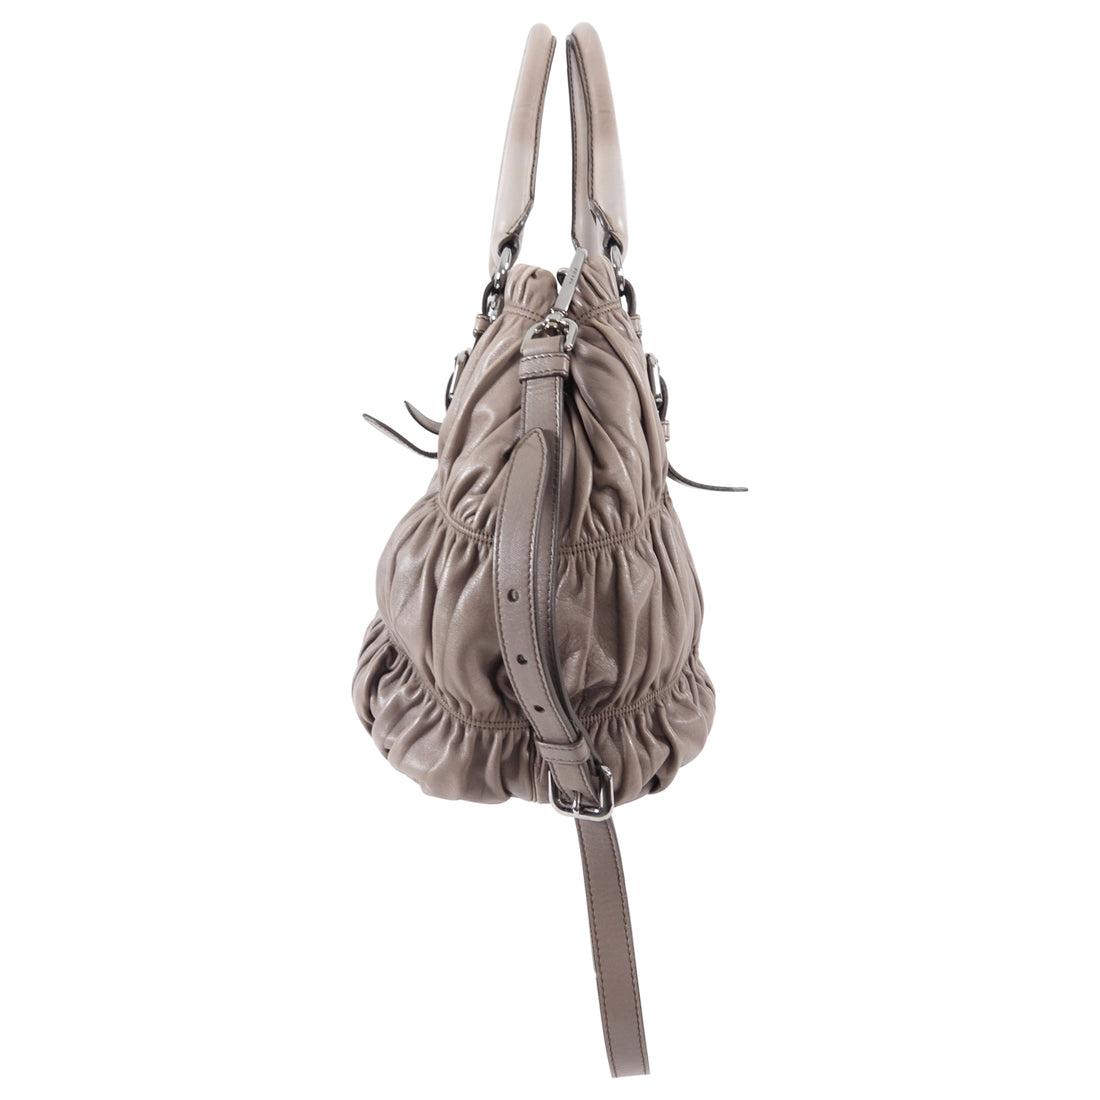 Prada Taupe Gaufre Pleated Two-Way Satchel Tote Bag